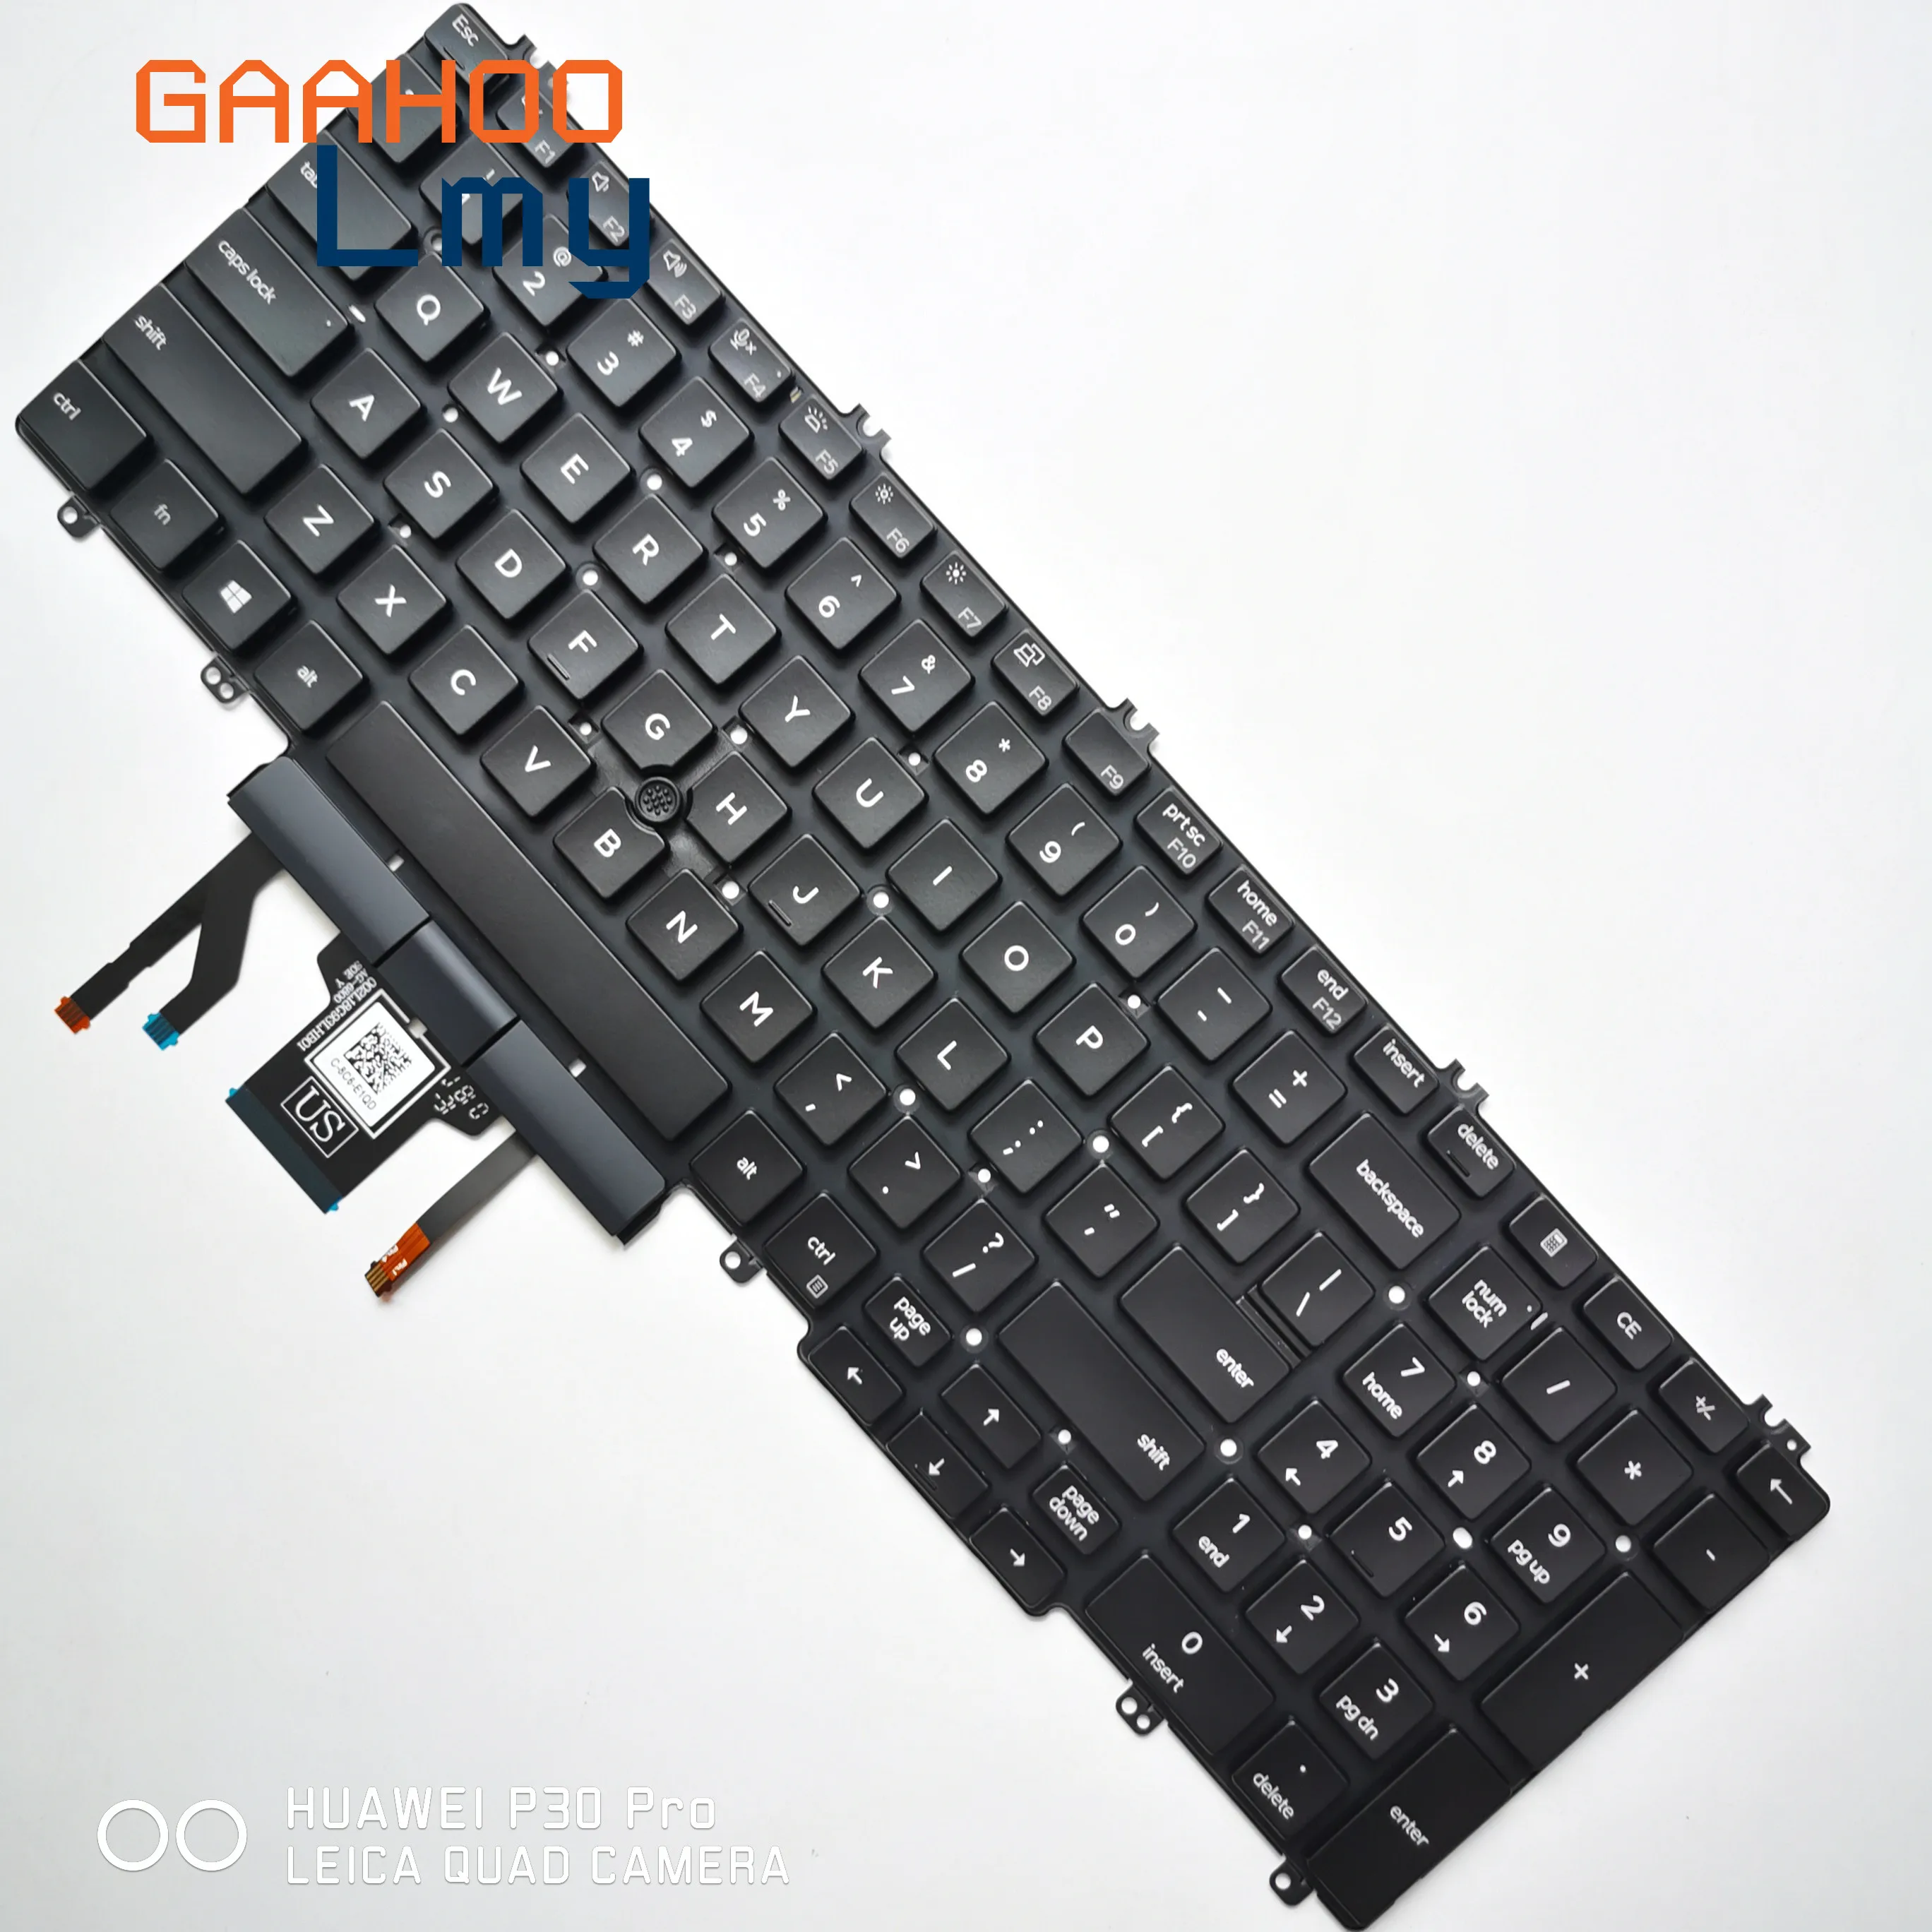 

Brand new original US backlit keyboard for DELL LATITUDE 3500 5500 5501 Precision 3540 3541 15'' laptop with trackpoint